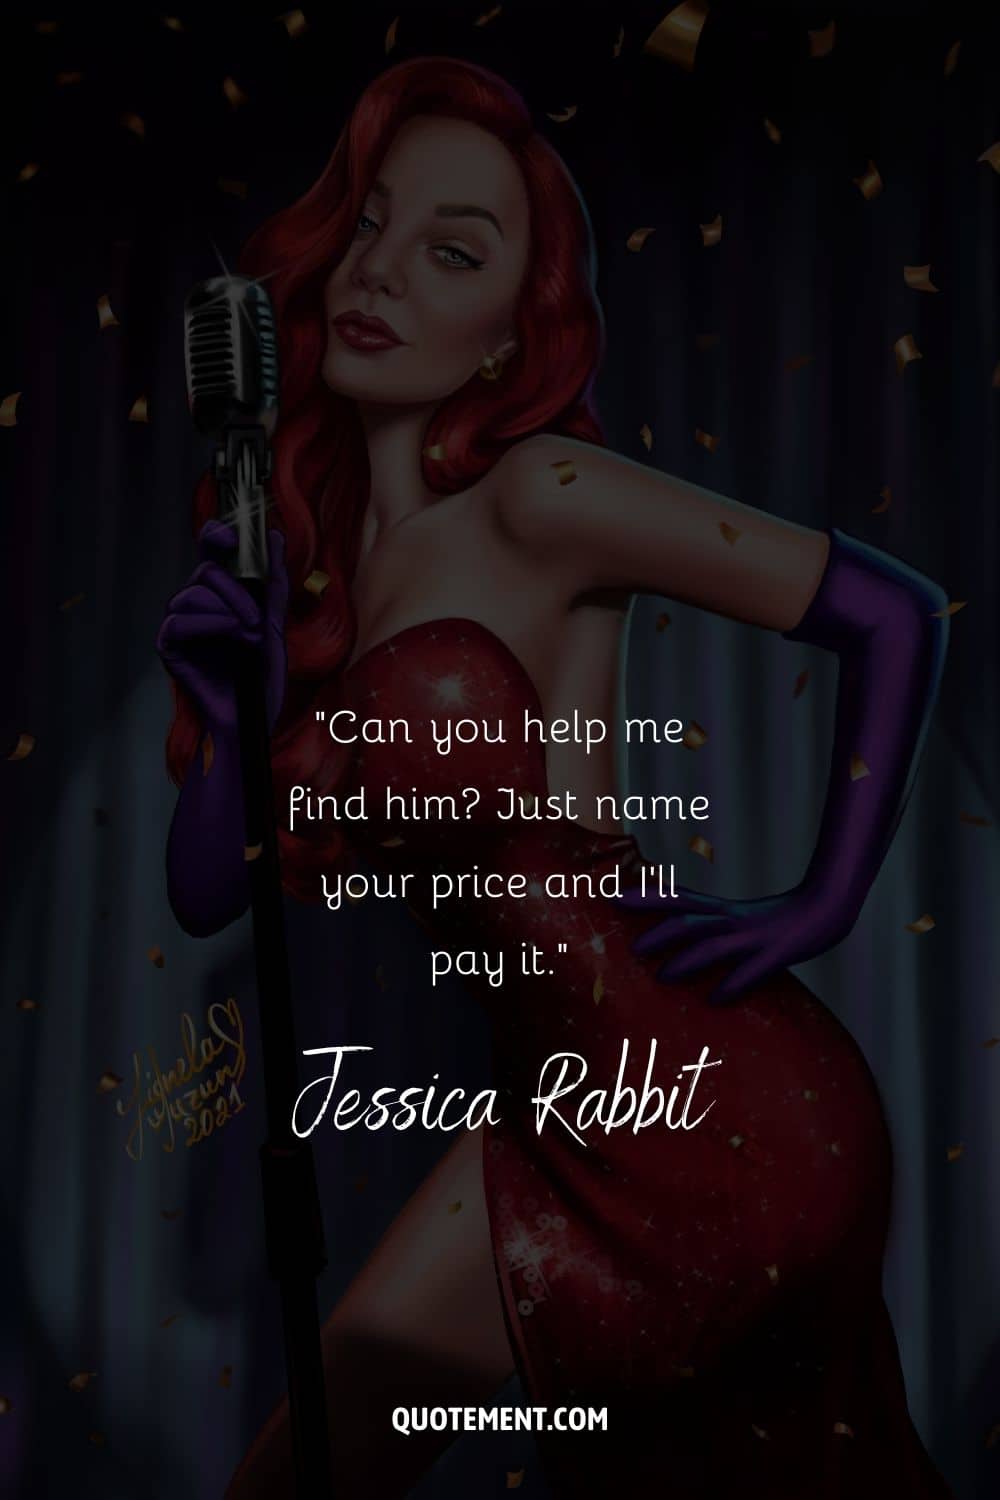 modern illustration of Jessica Rabbit with her movie quote
